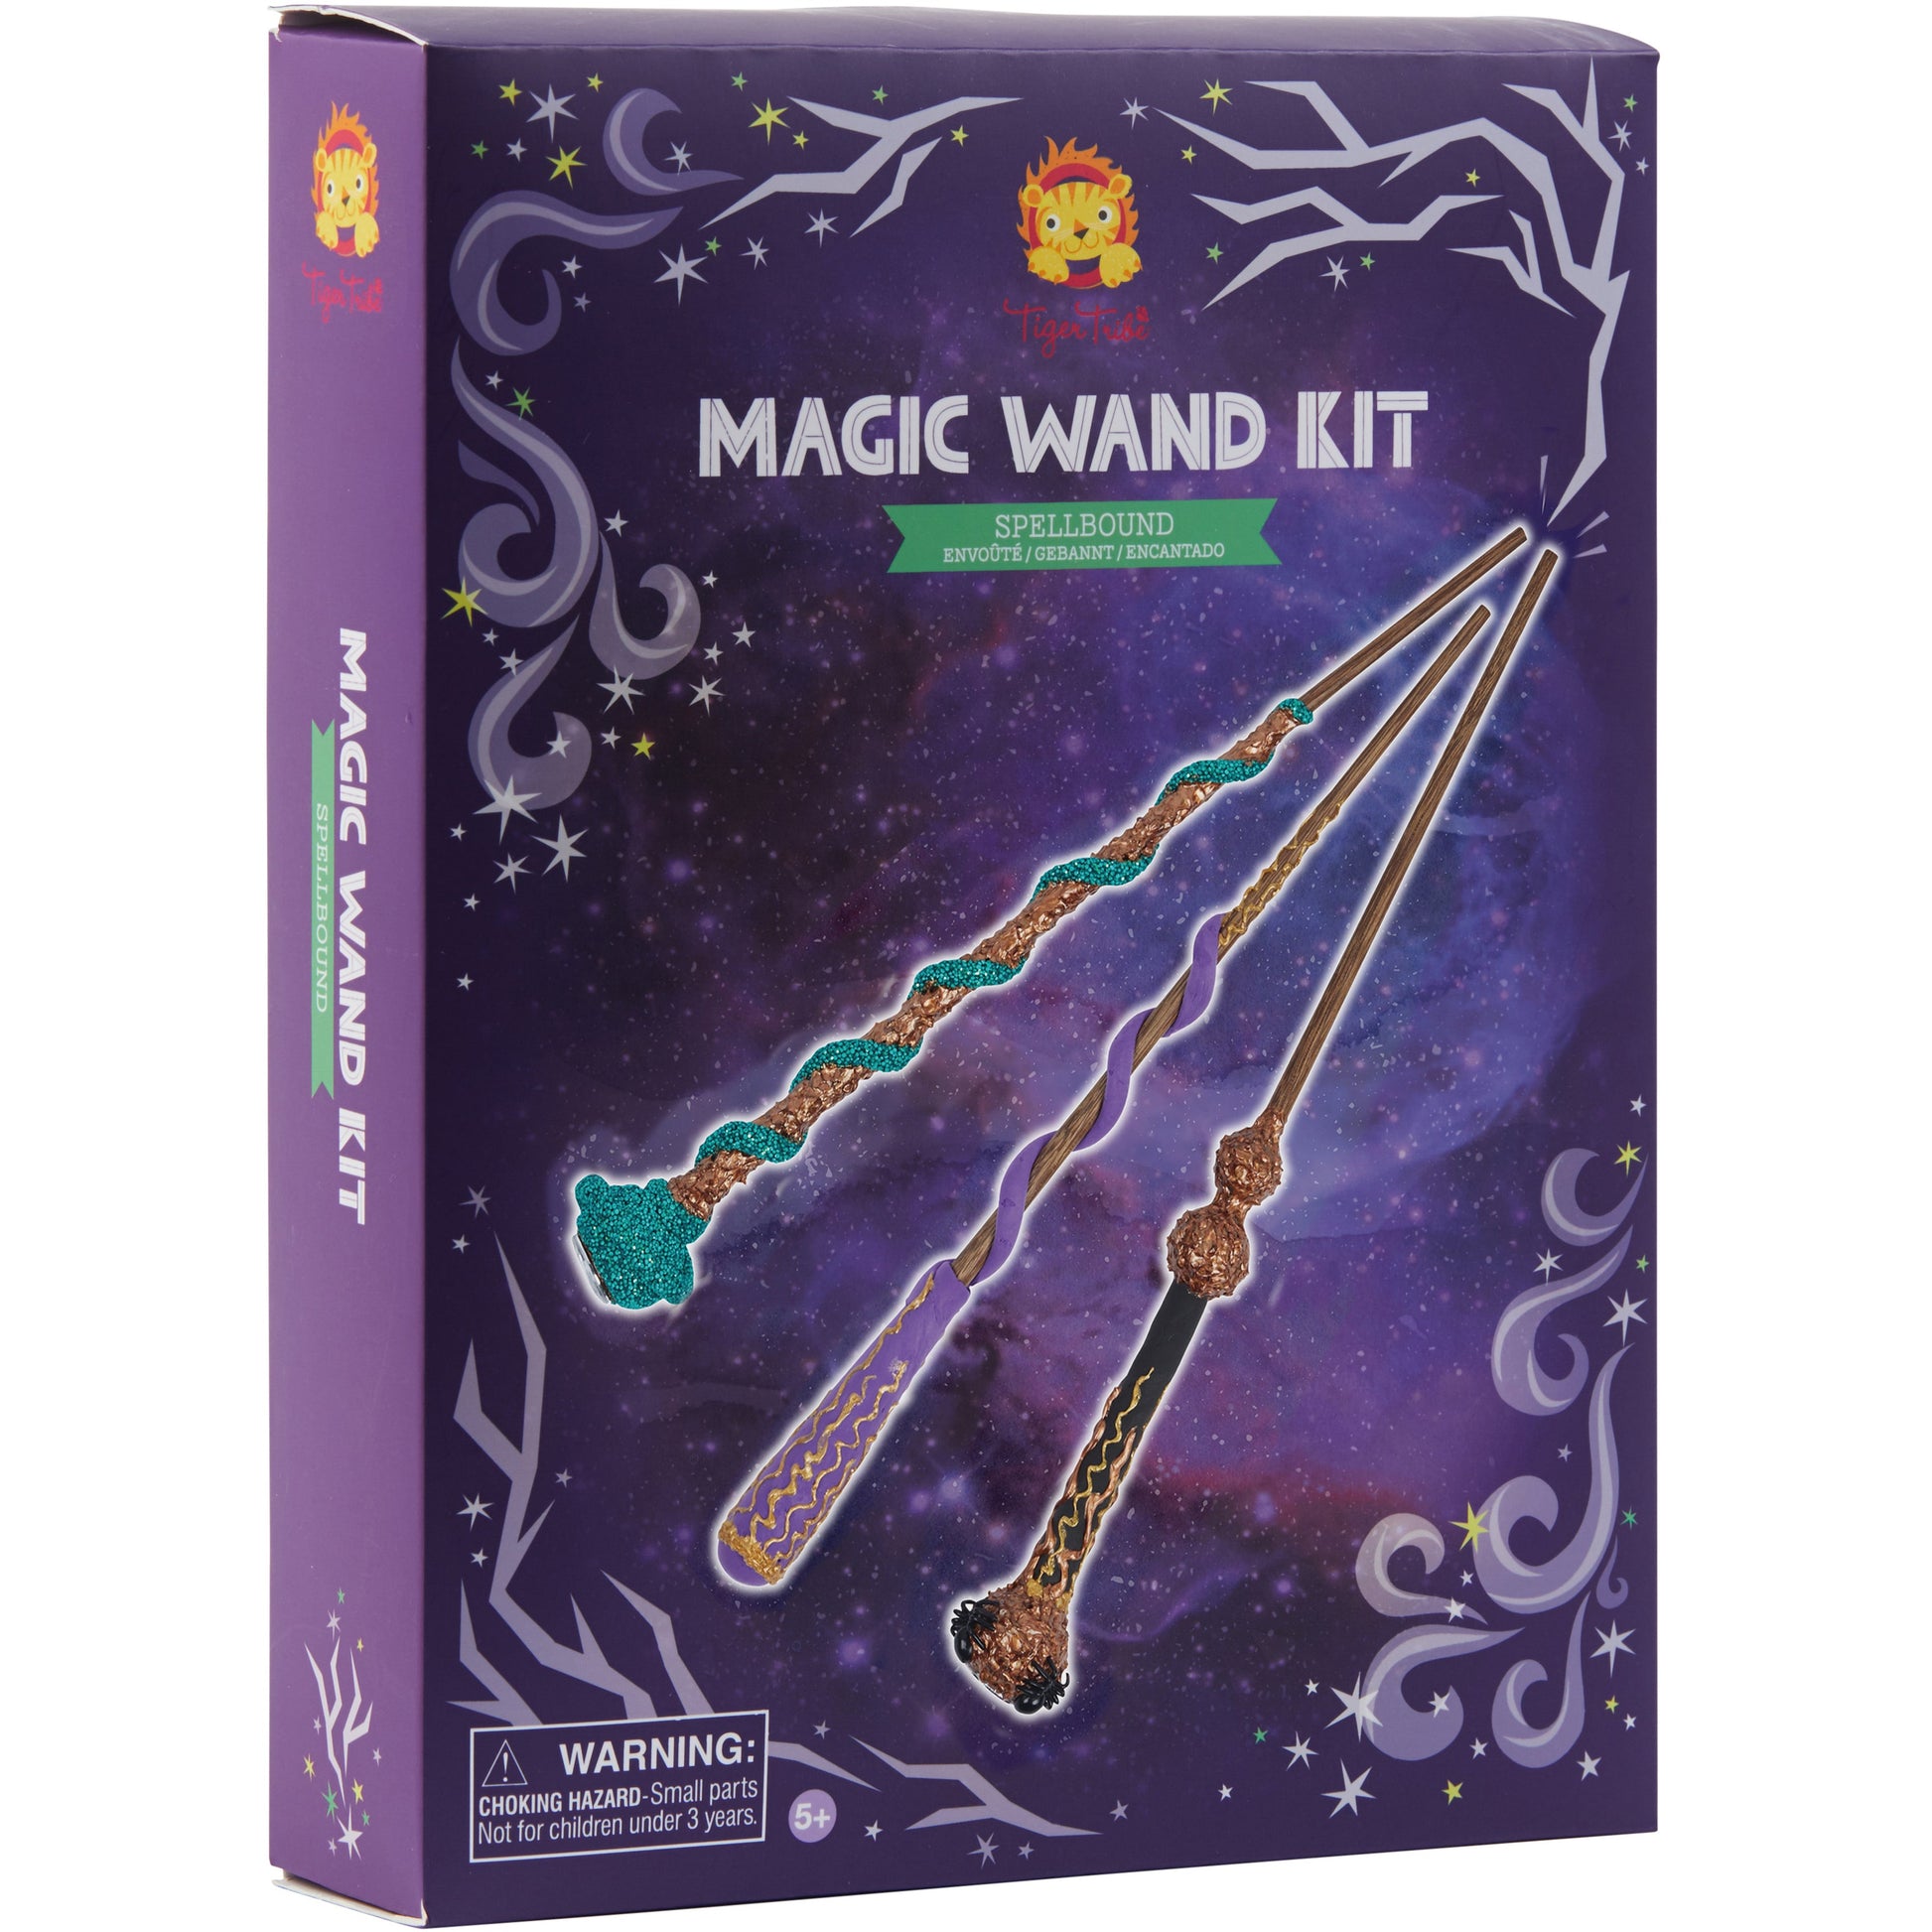 Tiger Tribe Magic Wand Kit Spellbound